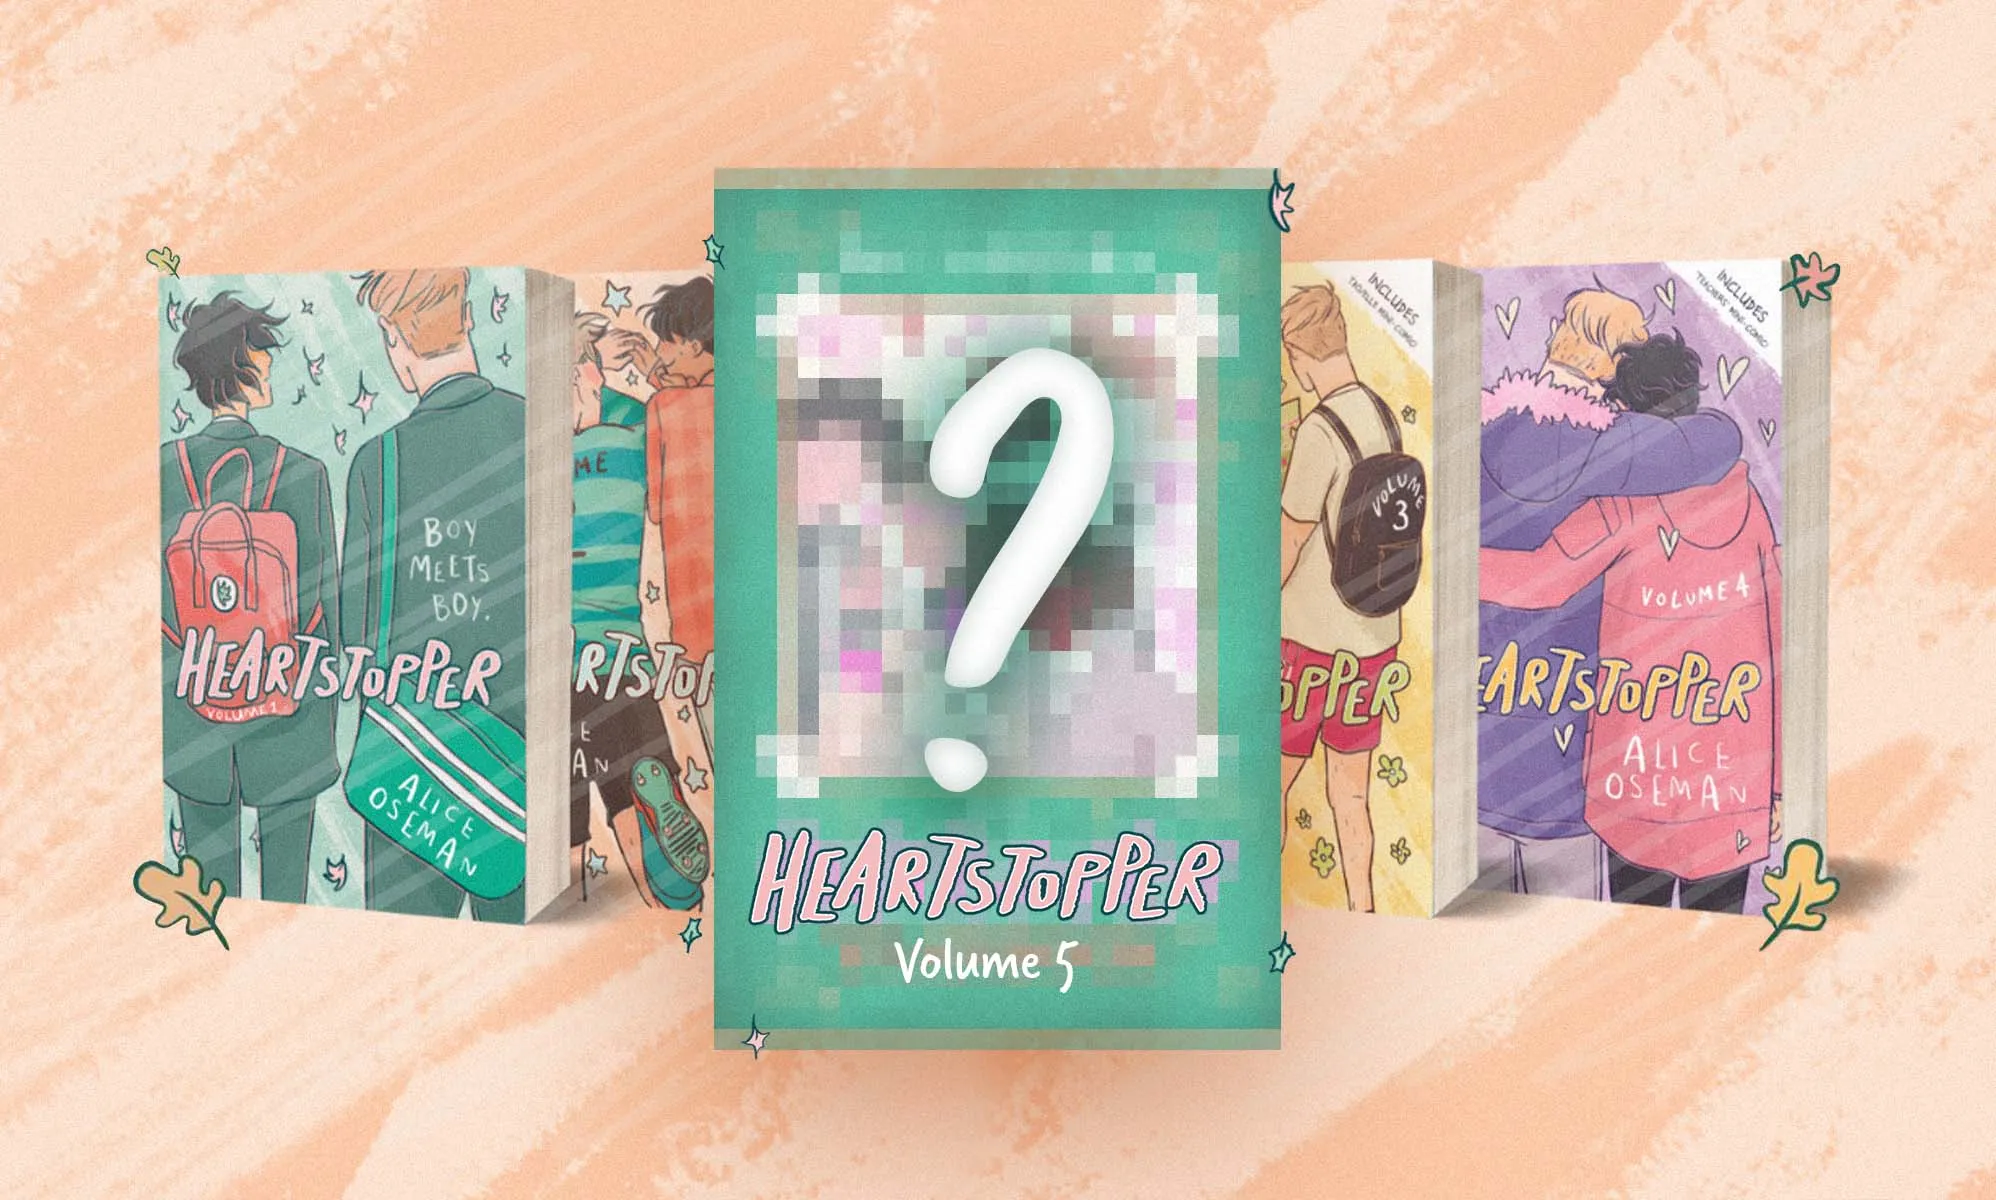 Heartstopper Volume 5: Release date and where to read it